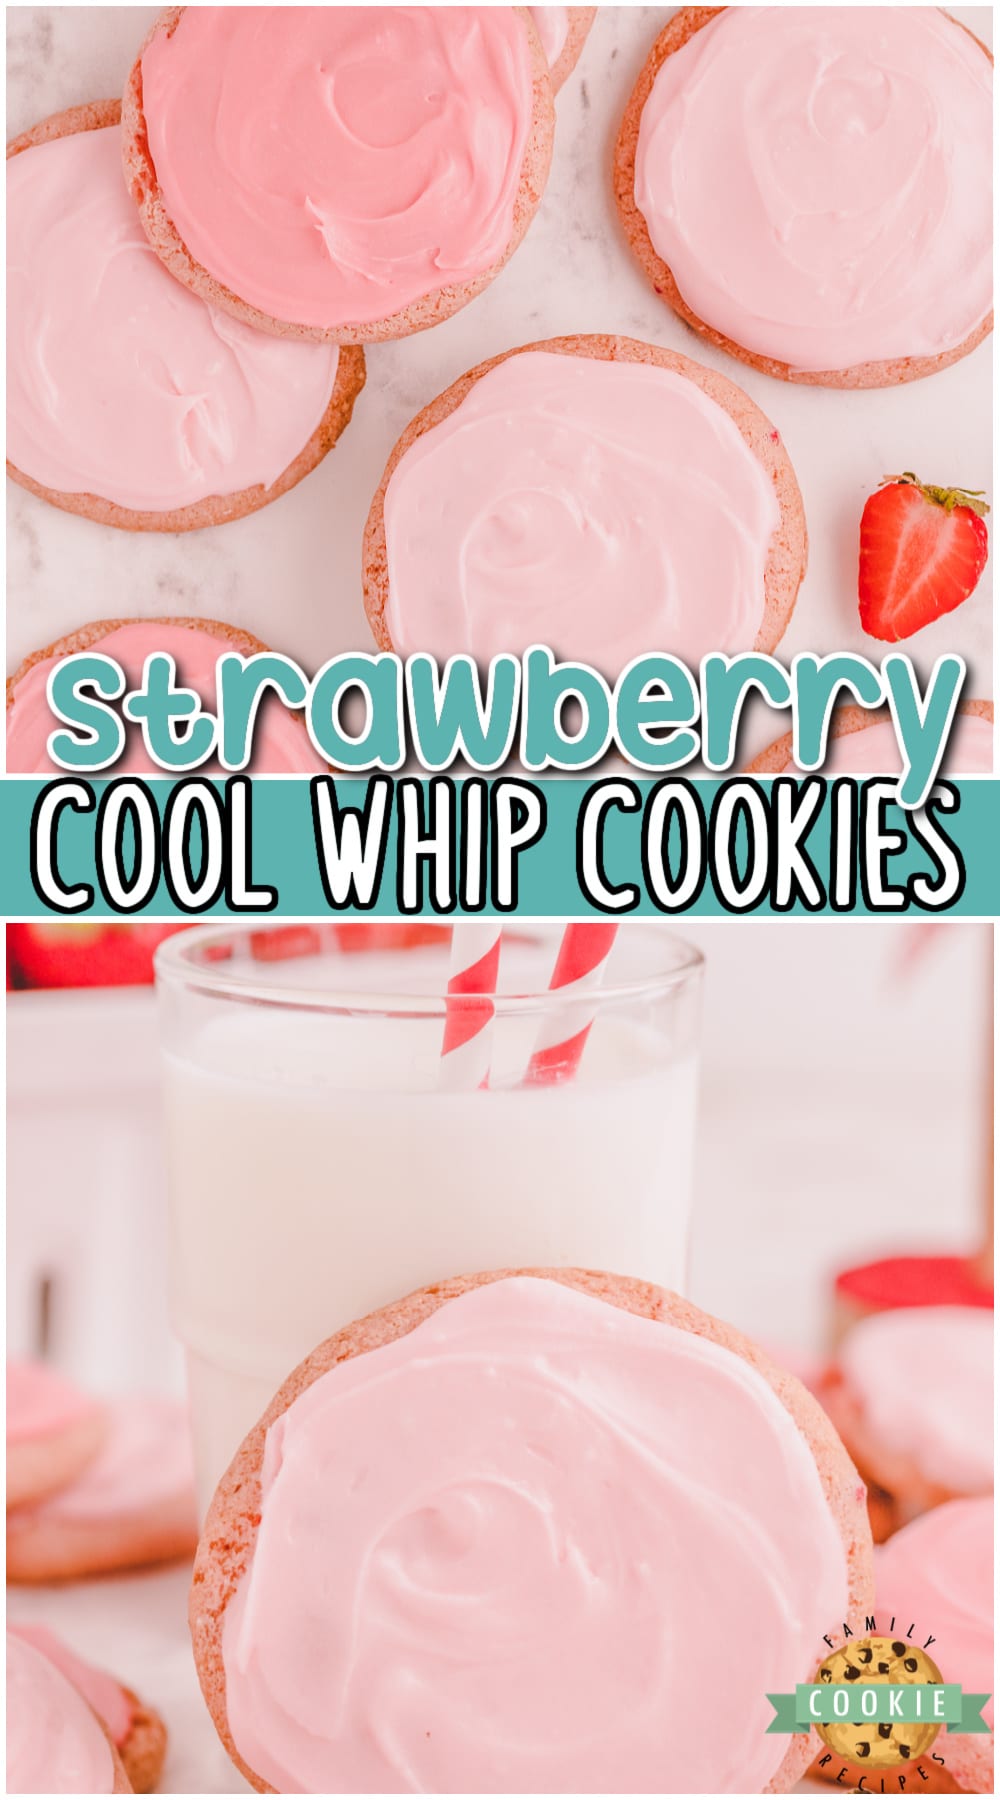 Strawberry Cool Whip Cookies made with cake mix, Cool Whip and 1 egg! Simple cake mix cookie recipe with lovely strawberry flavor that everyone loves!